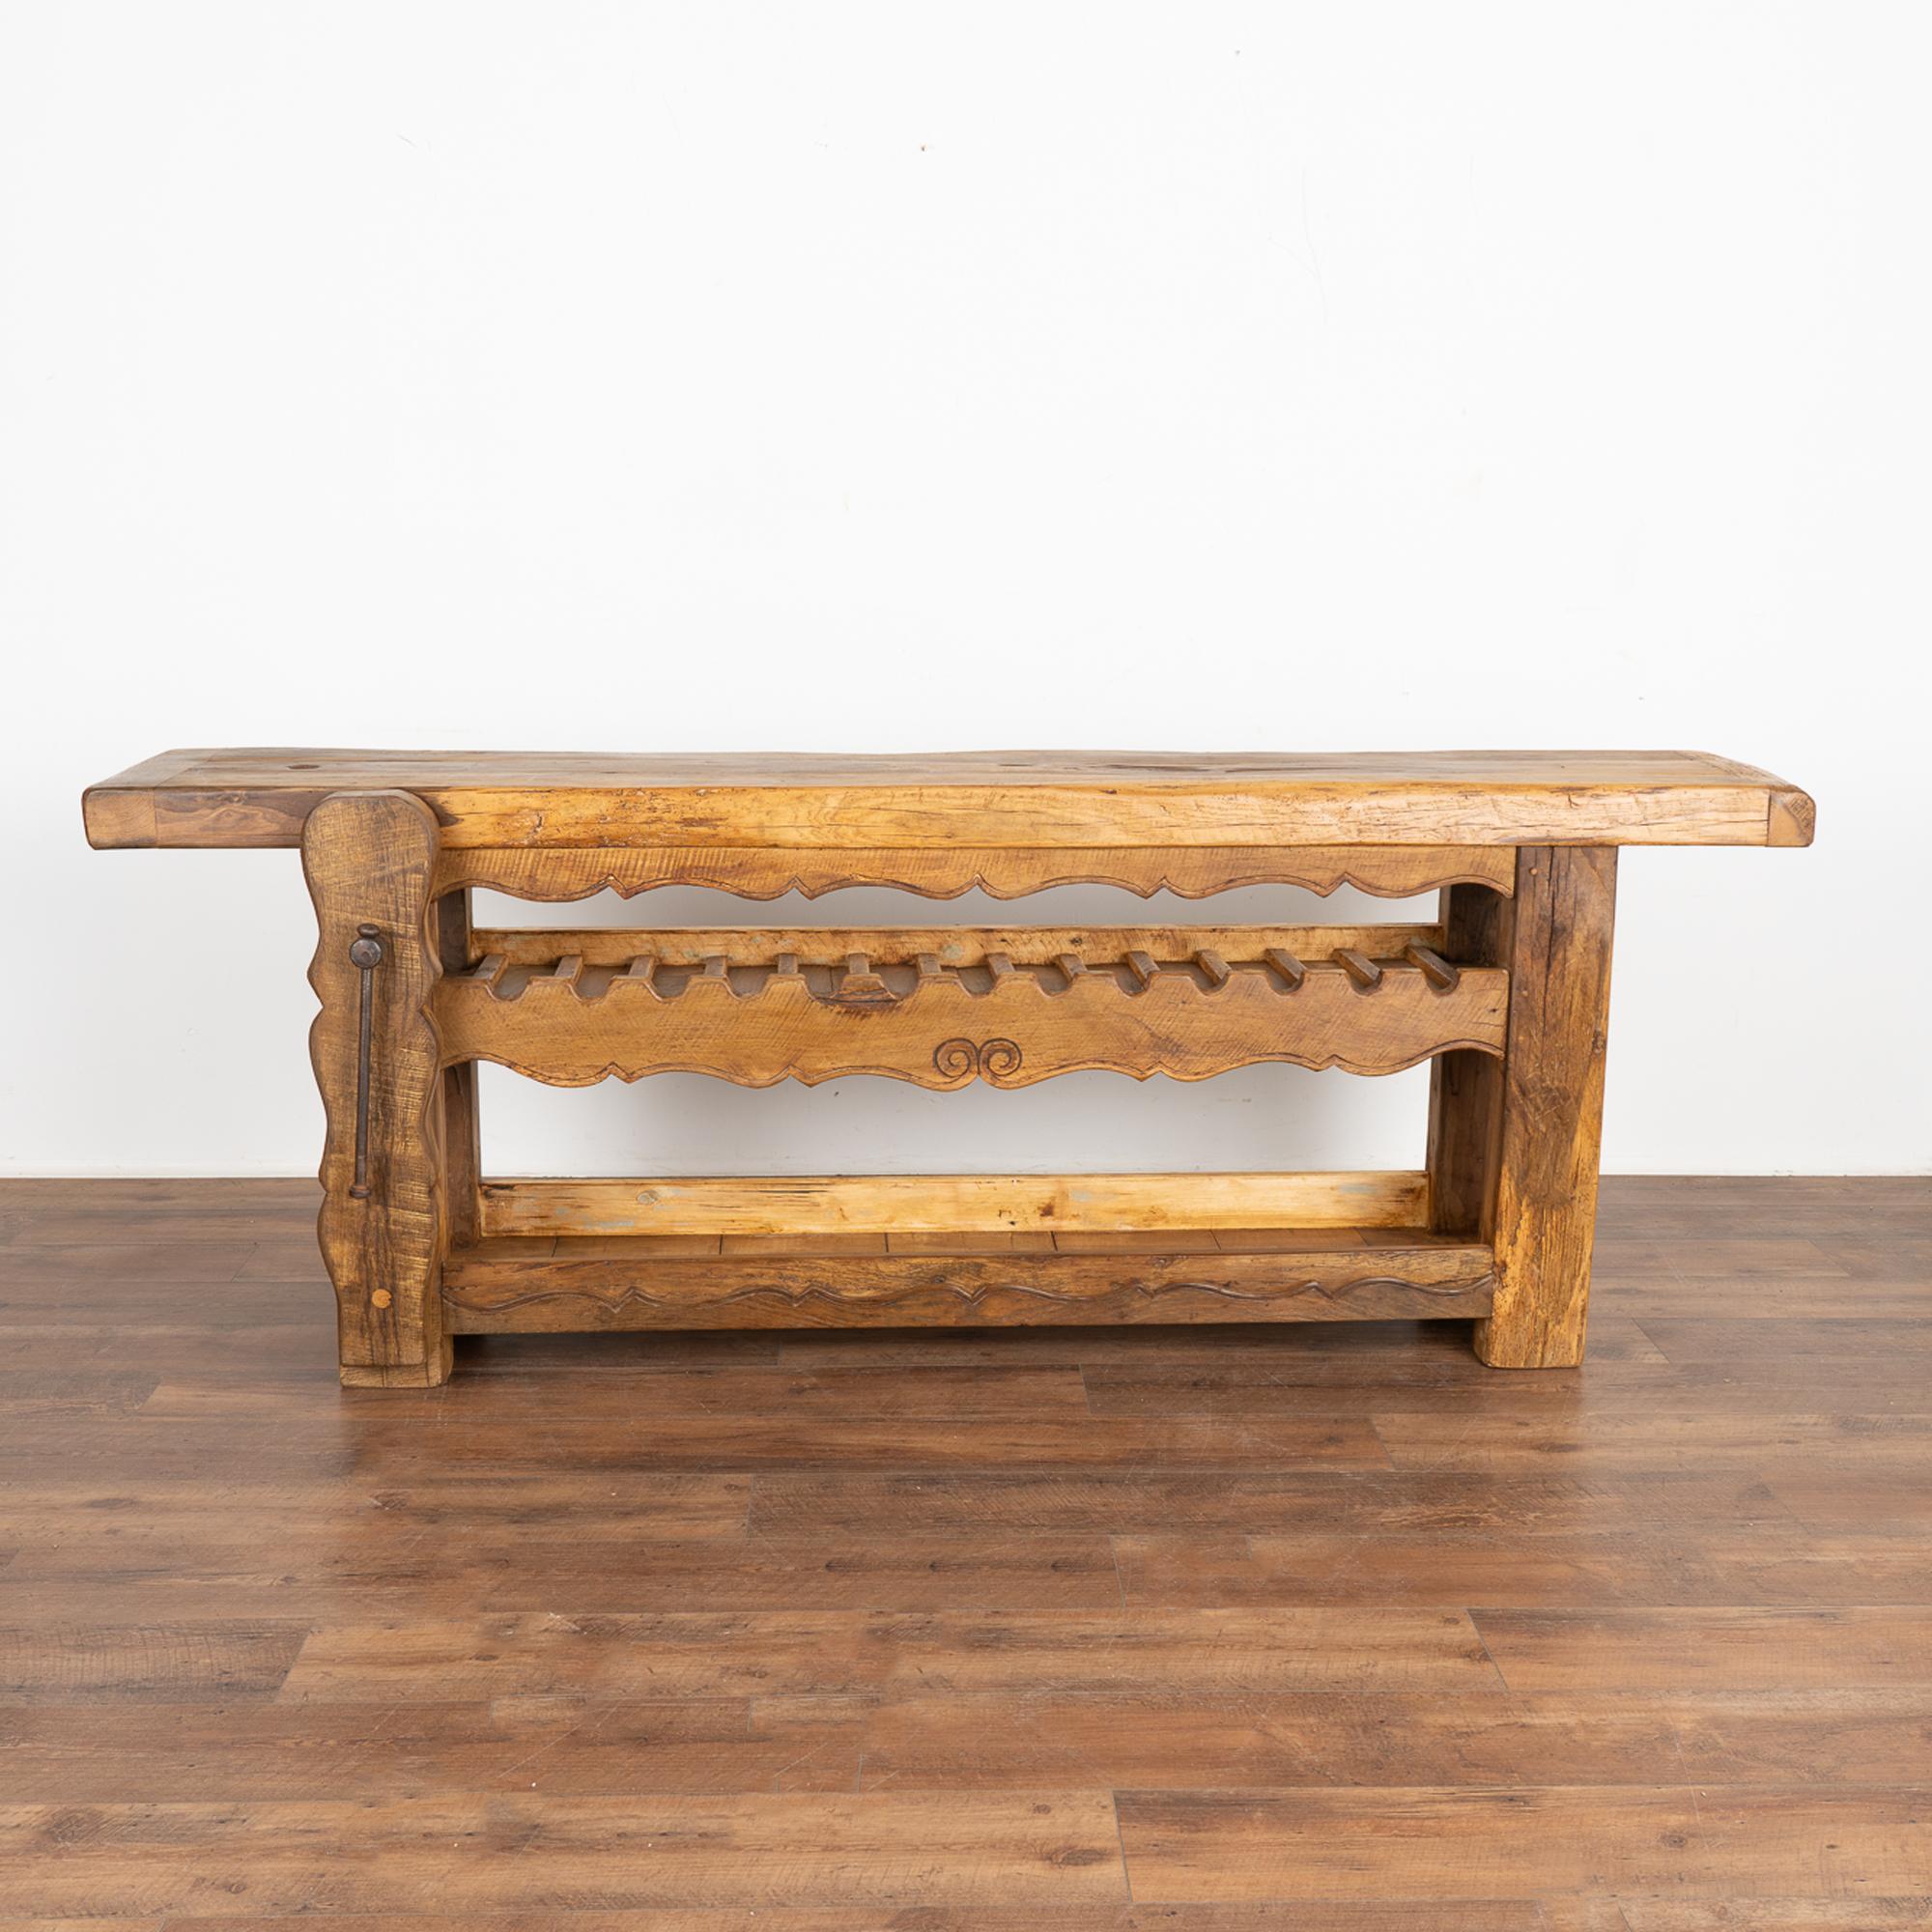 Rustic French Work Table Wine Rack Console, circa 1900's